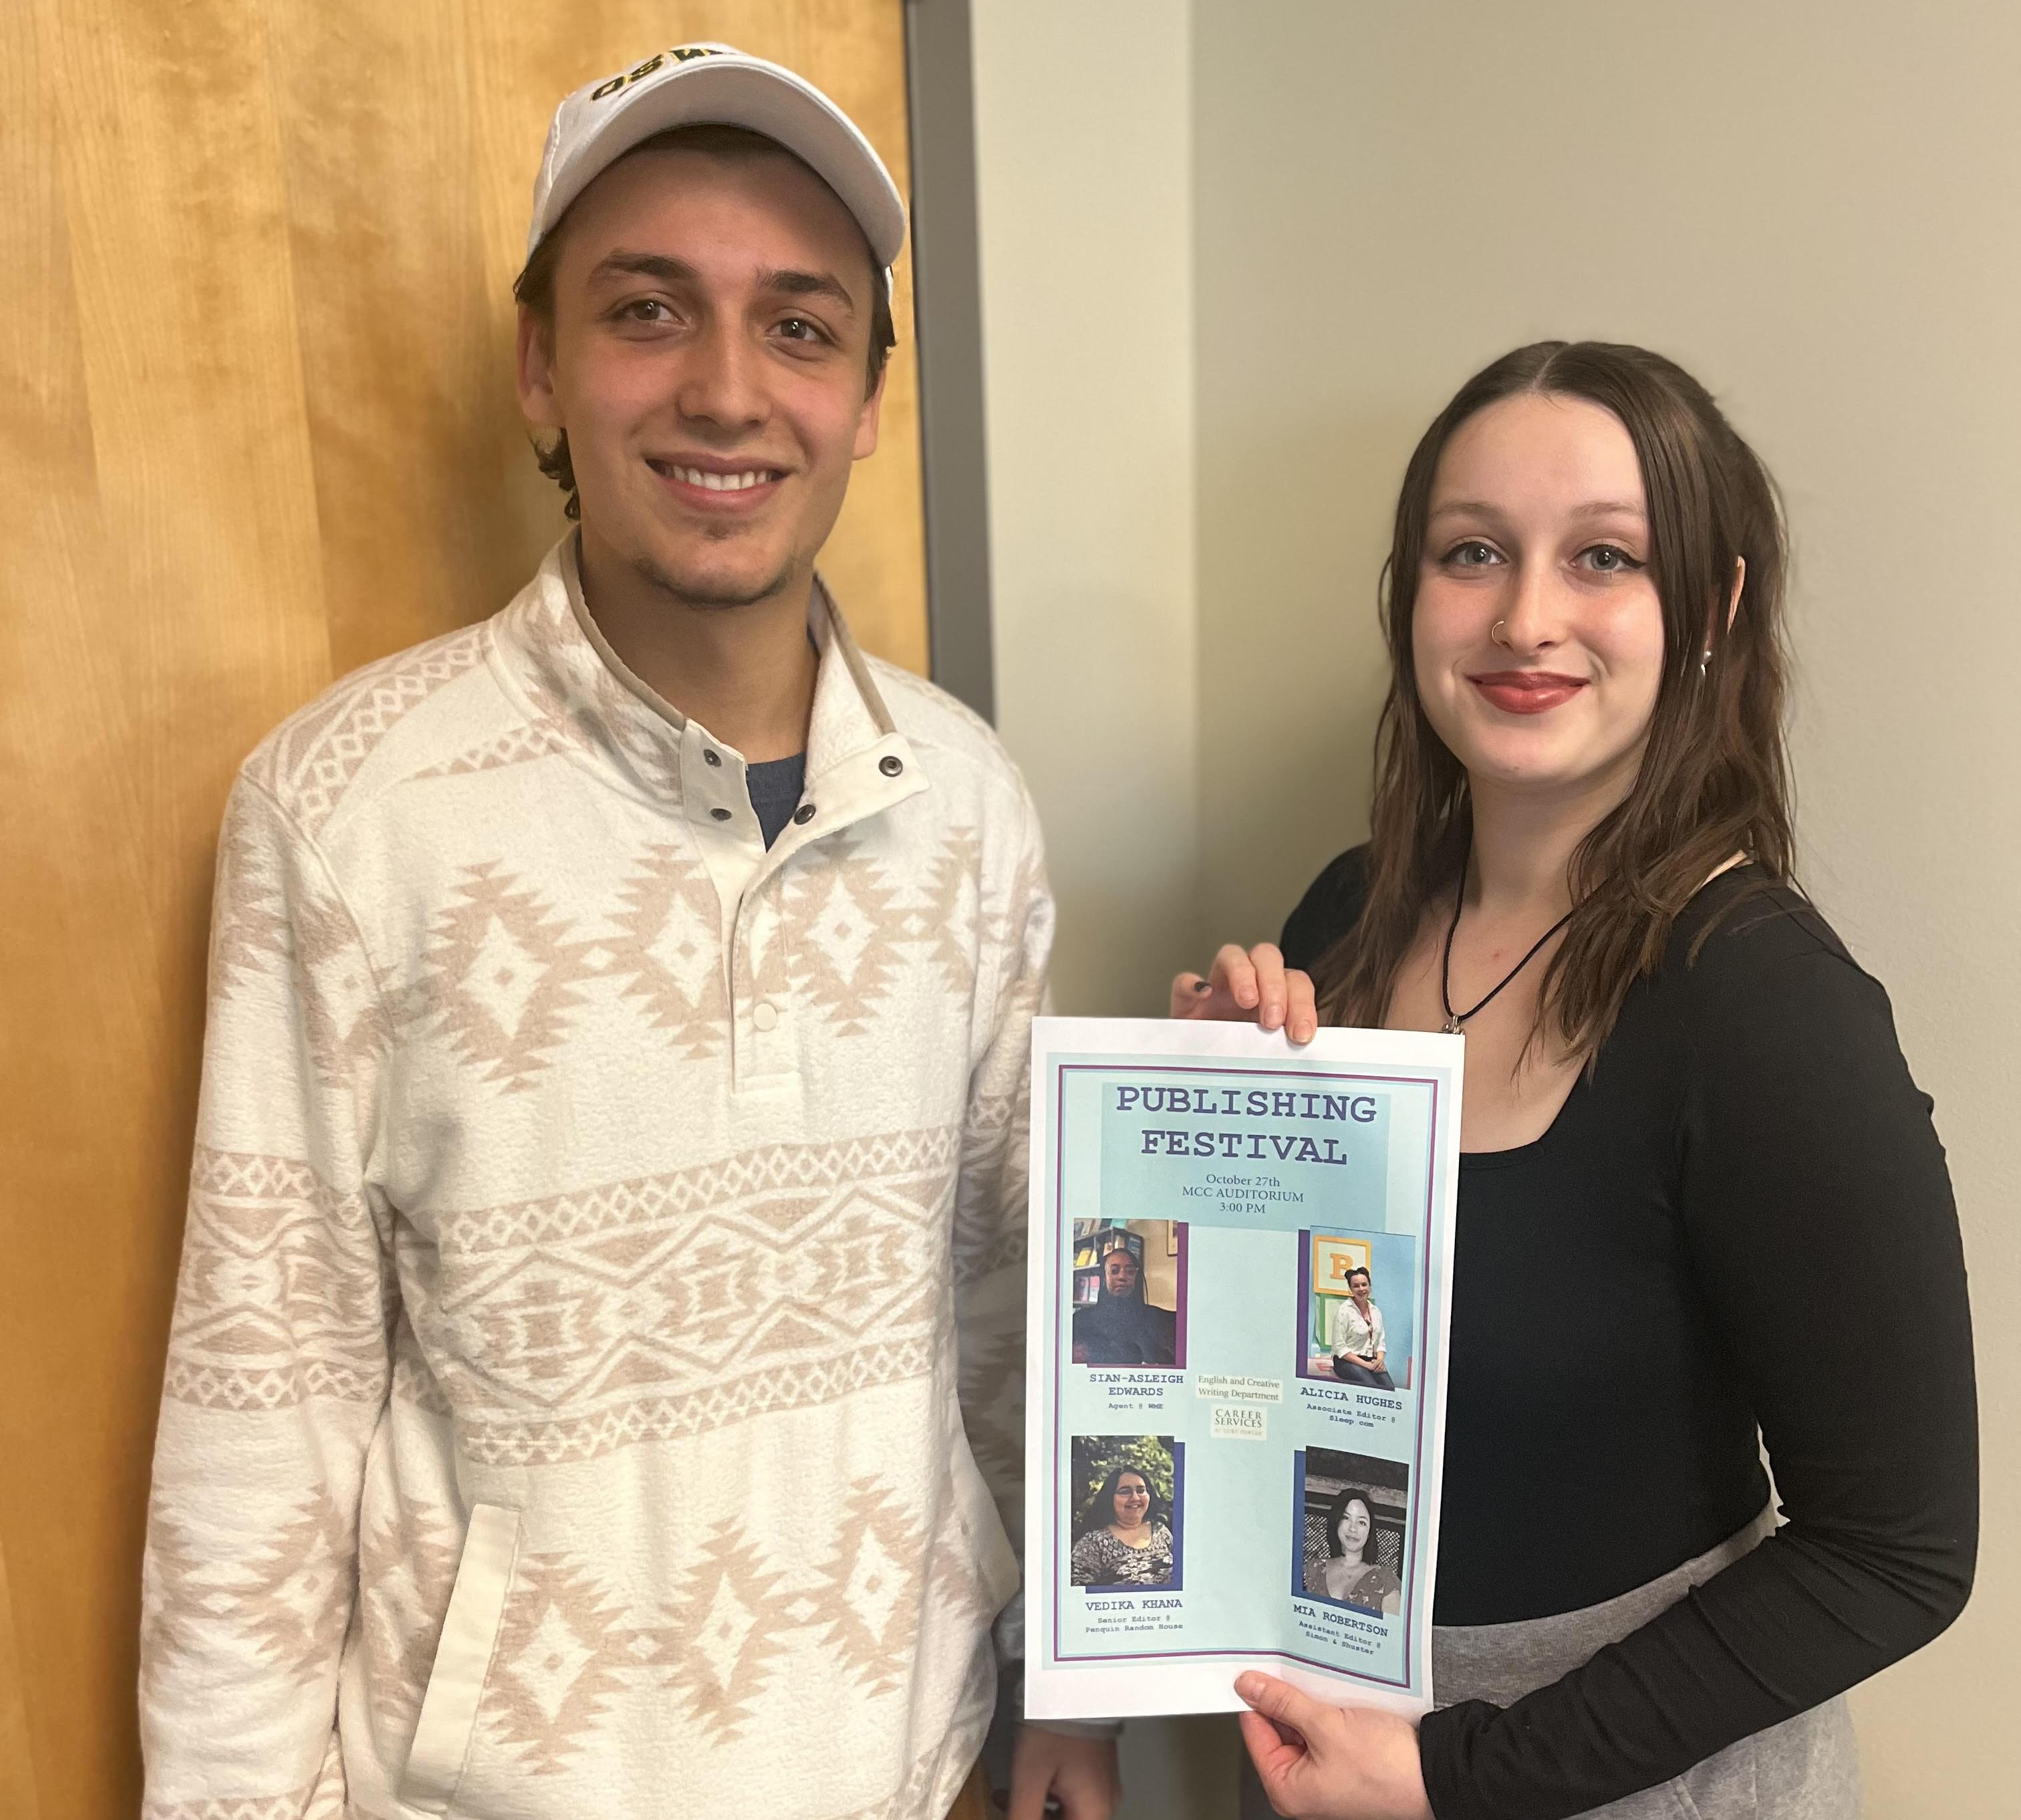 Students Gio Ferme and Nevaeh Scott designed the posters promoting this year’s Publishing Festival, which will take place on Oct. 27.